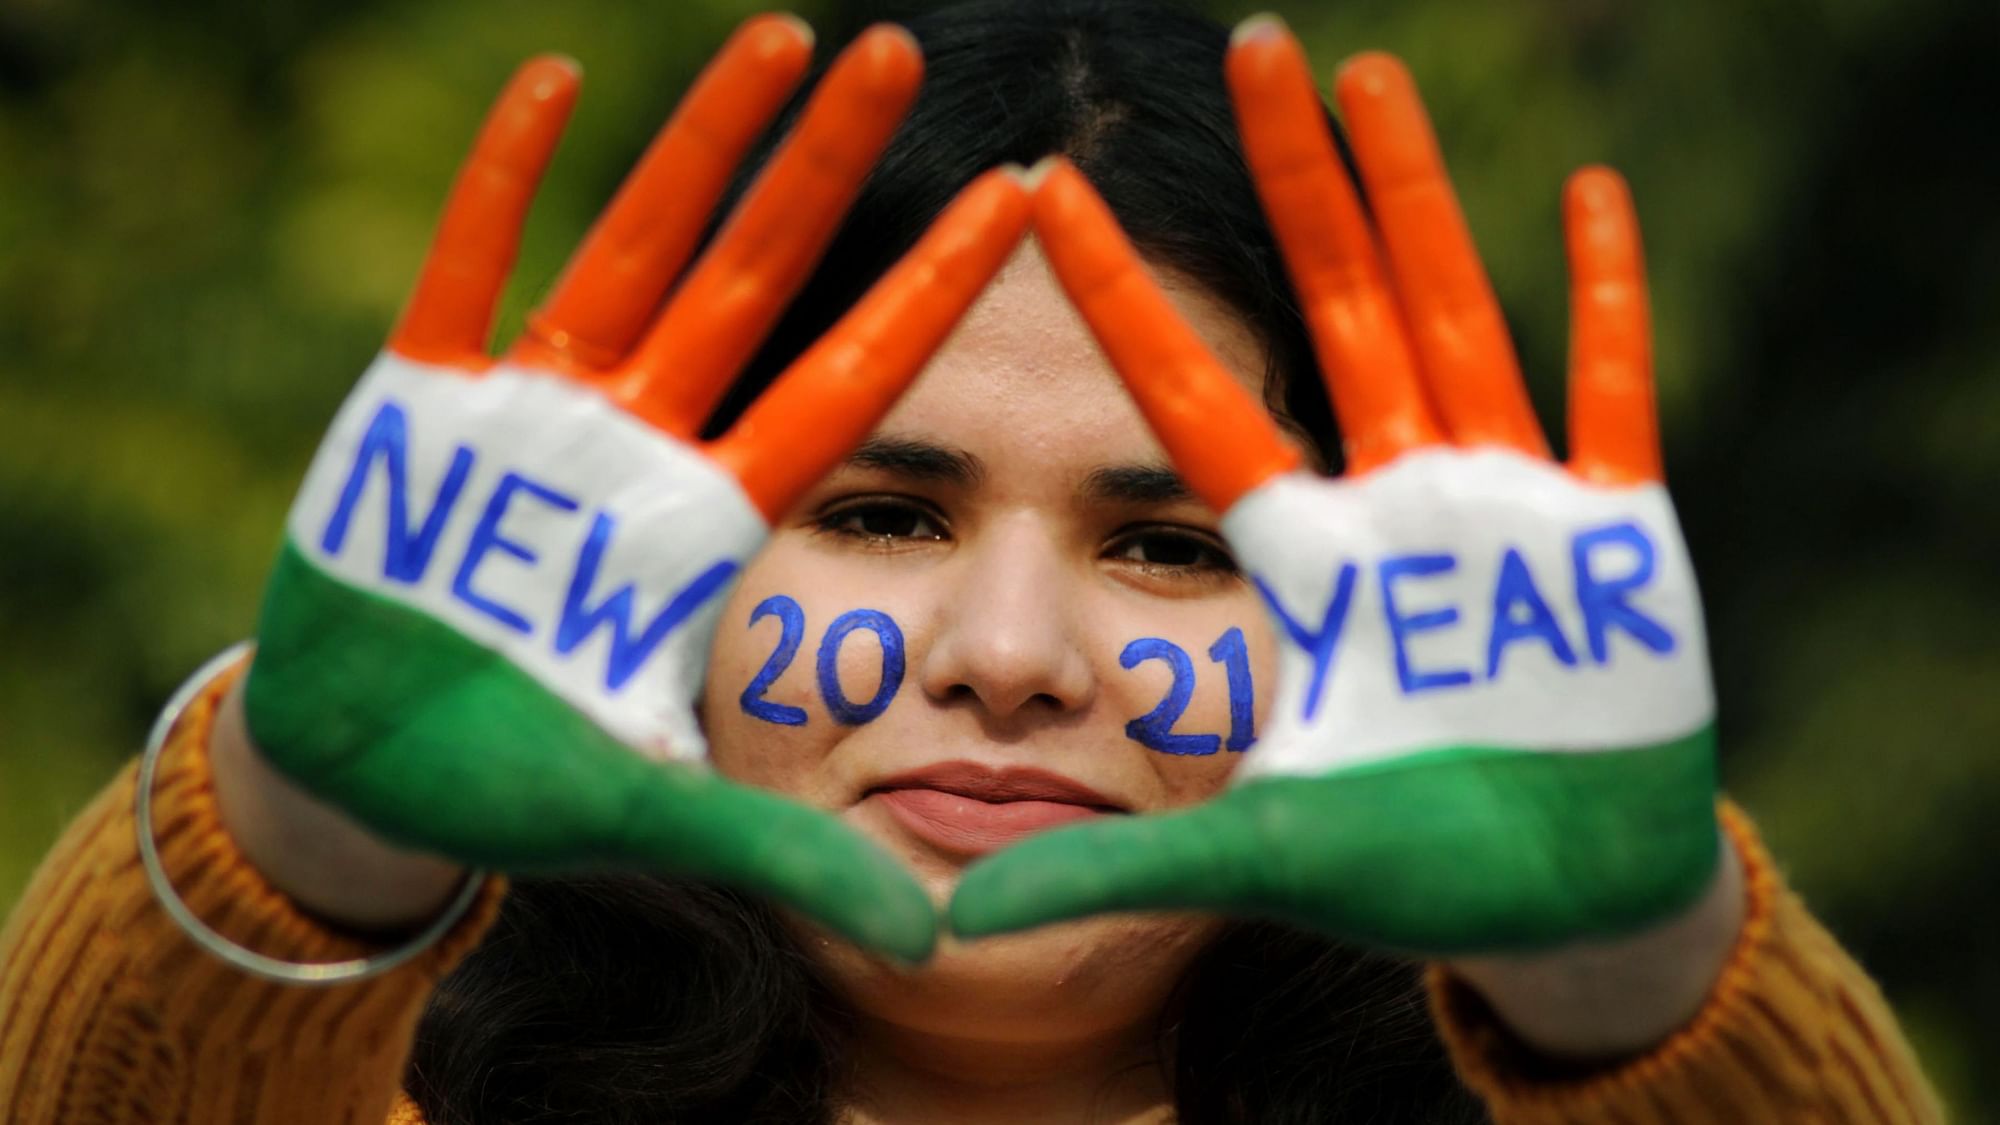  A young woman with painted hands poses for a photograph on the eve of New Year 2021, in Amritsar, Thursday, 31 December.